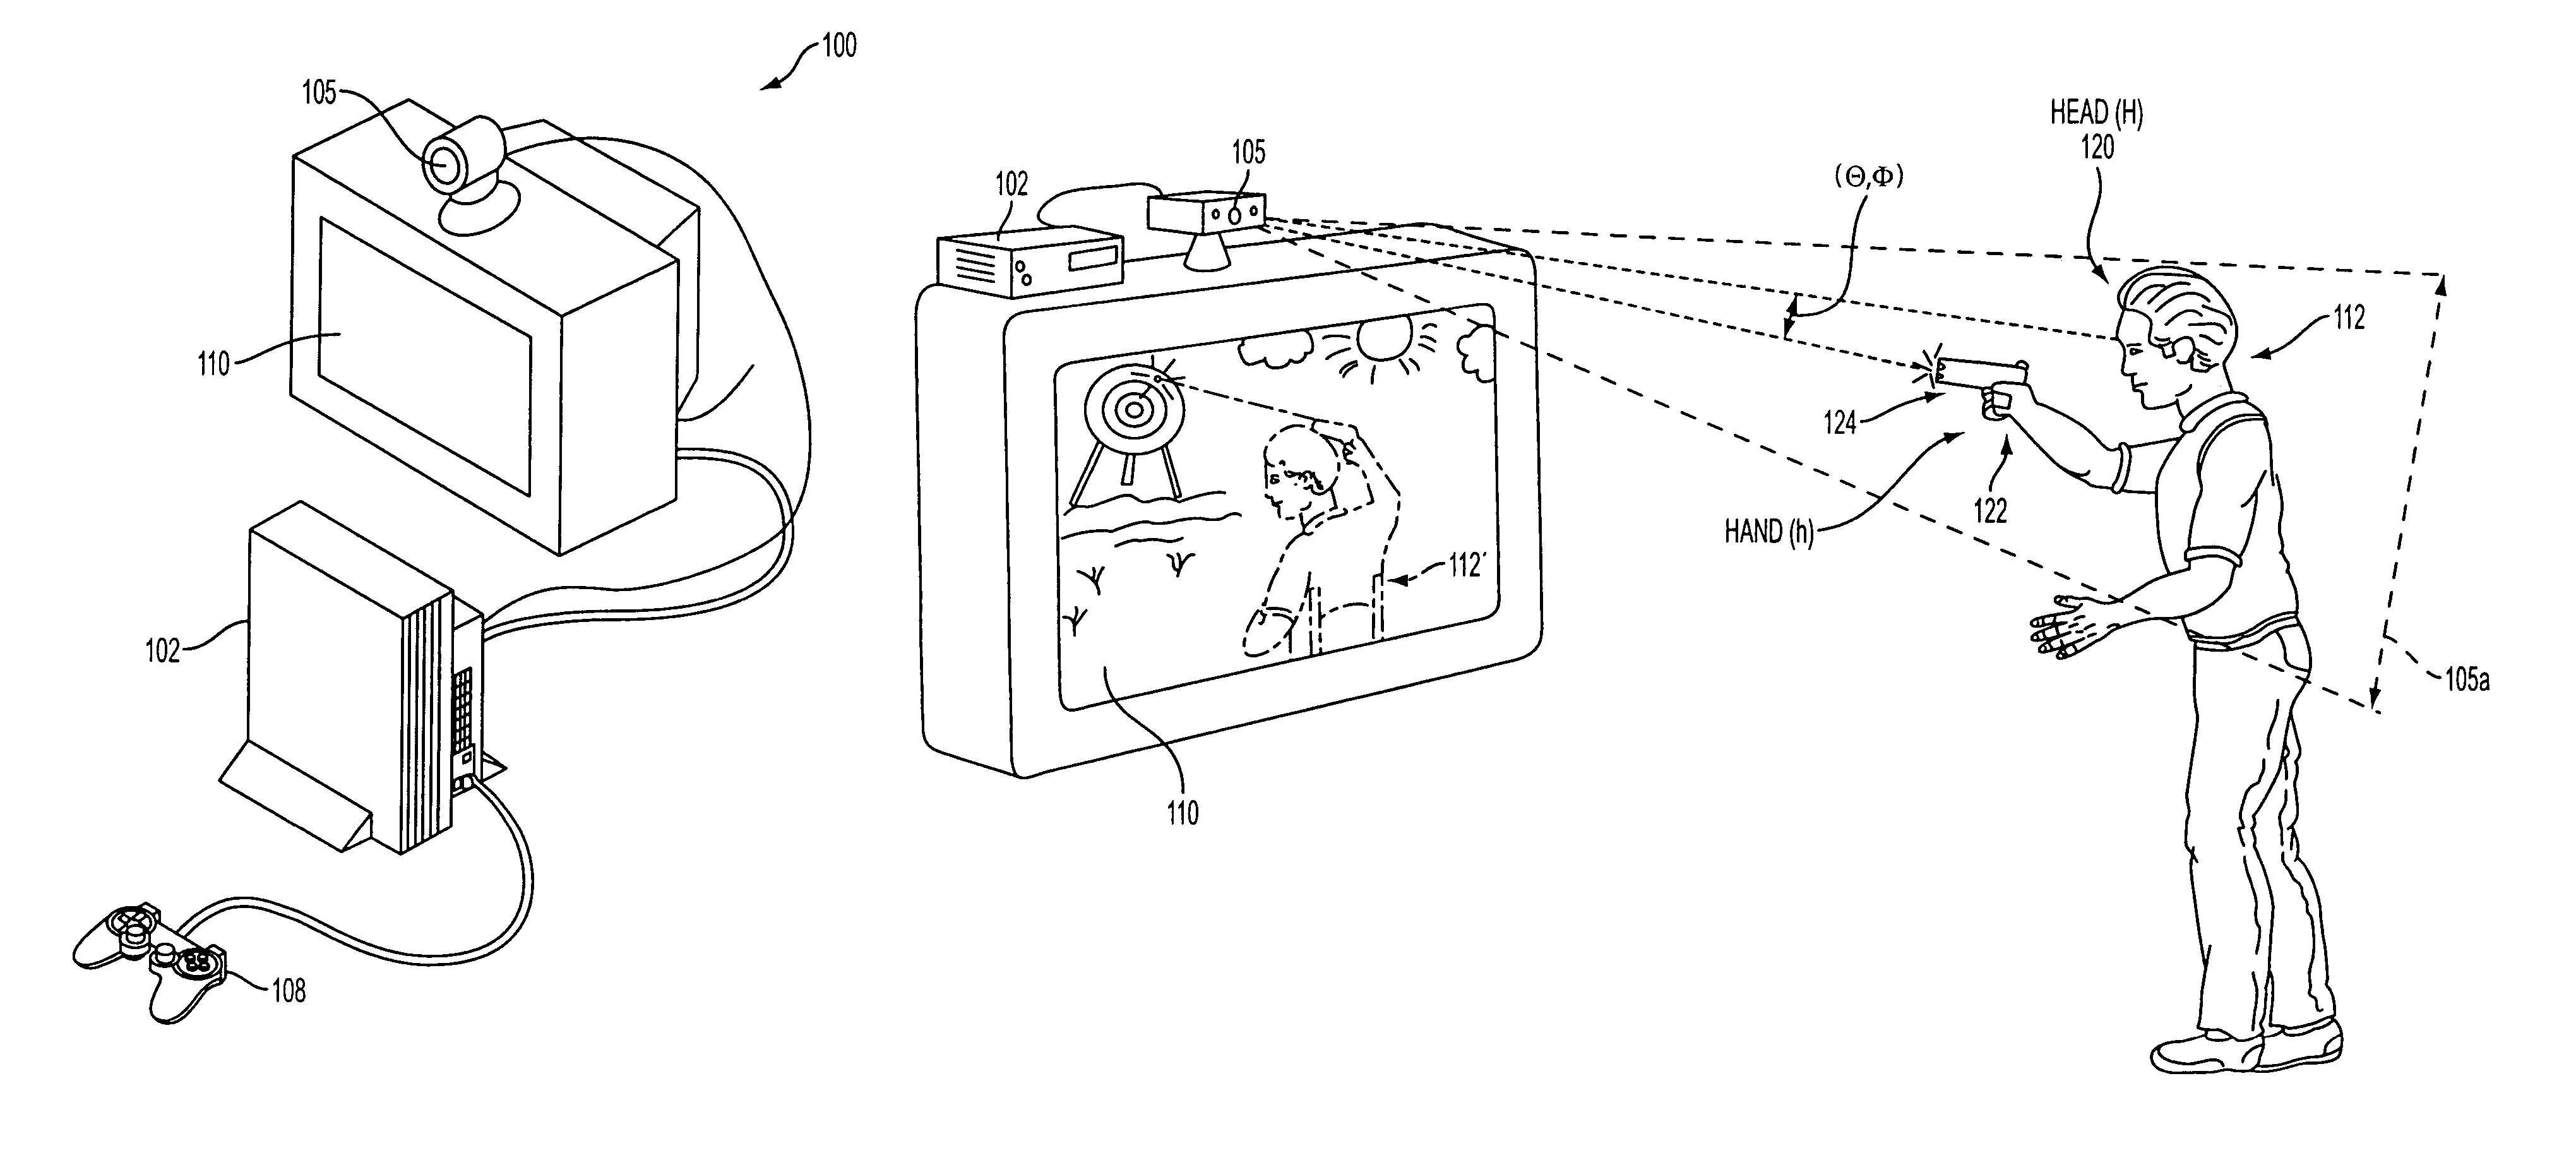 Methods and systems for enabling depth and direction detection when interfacing with a computer program